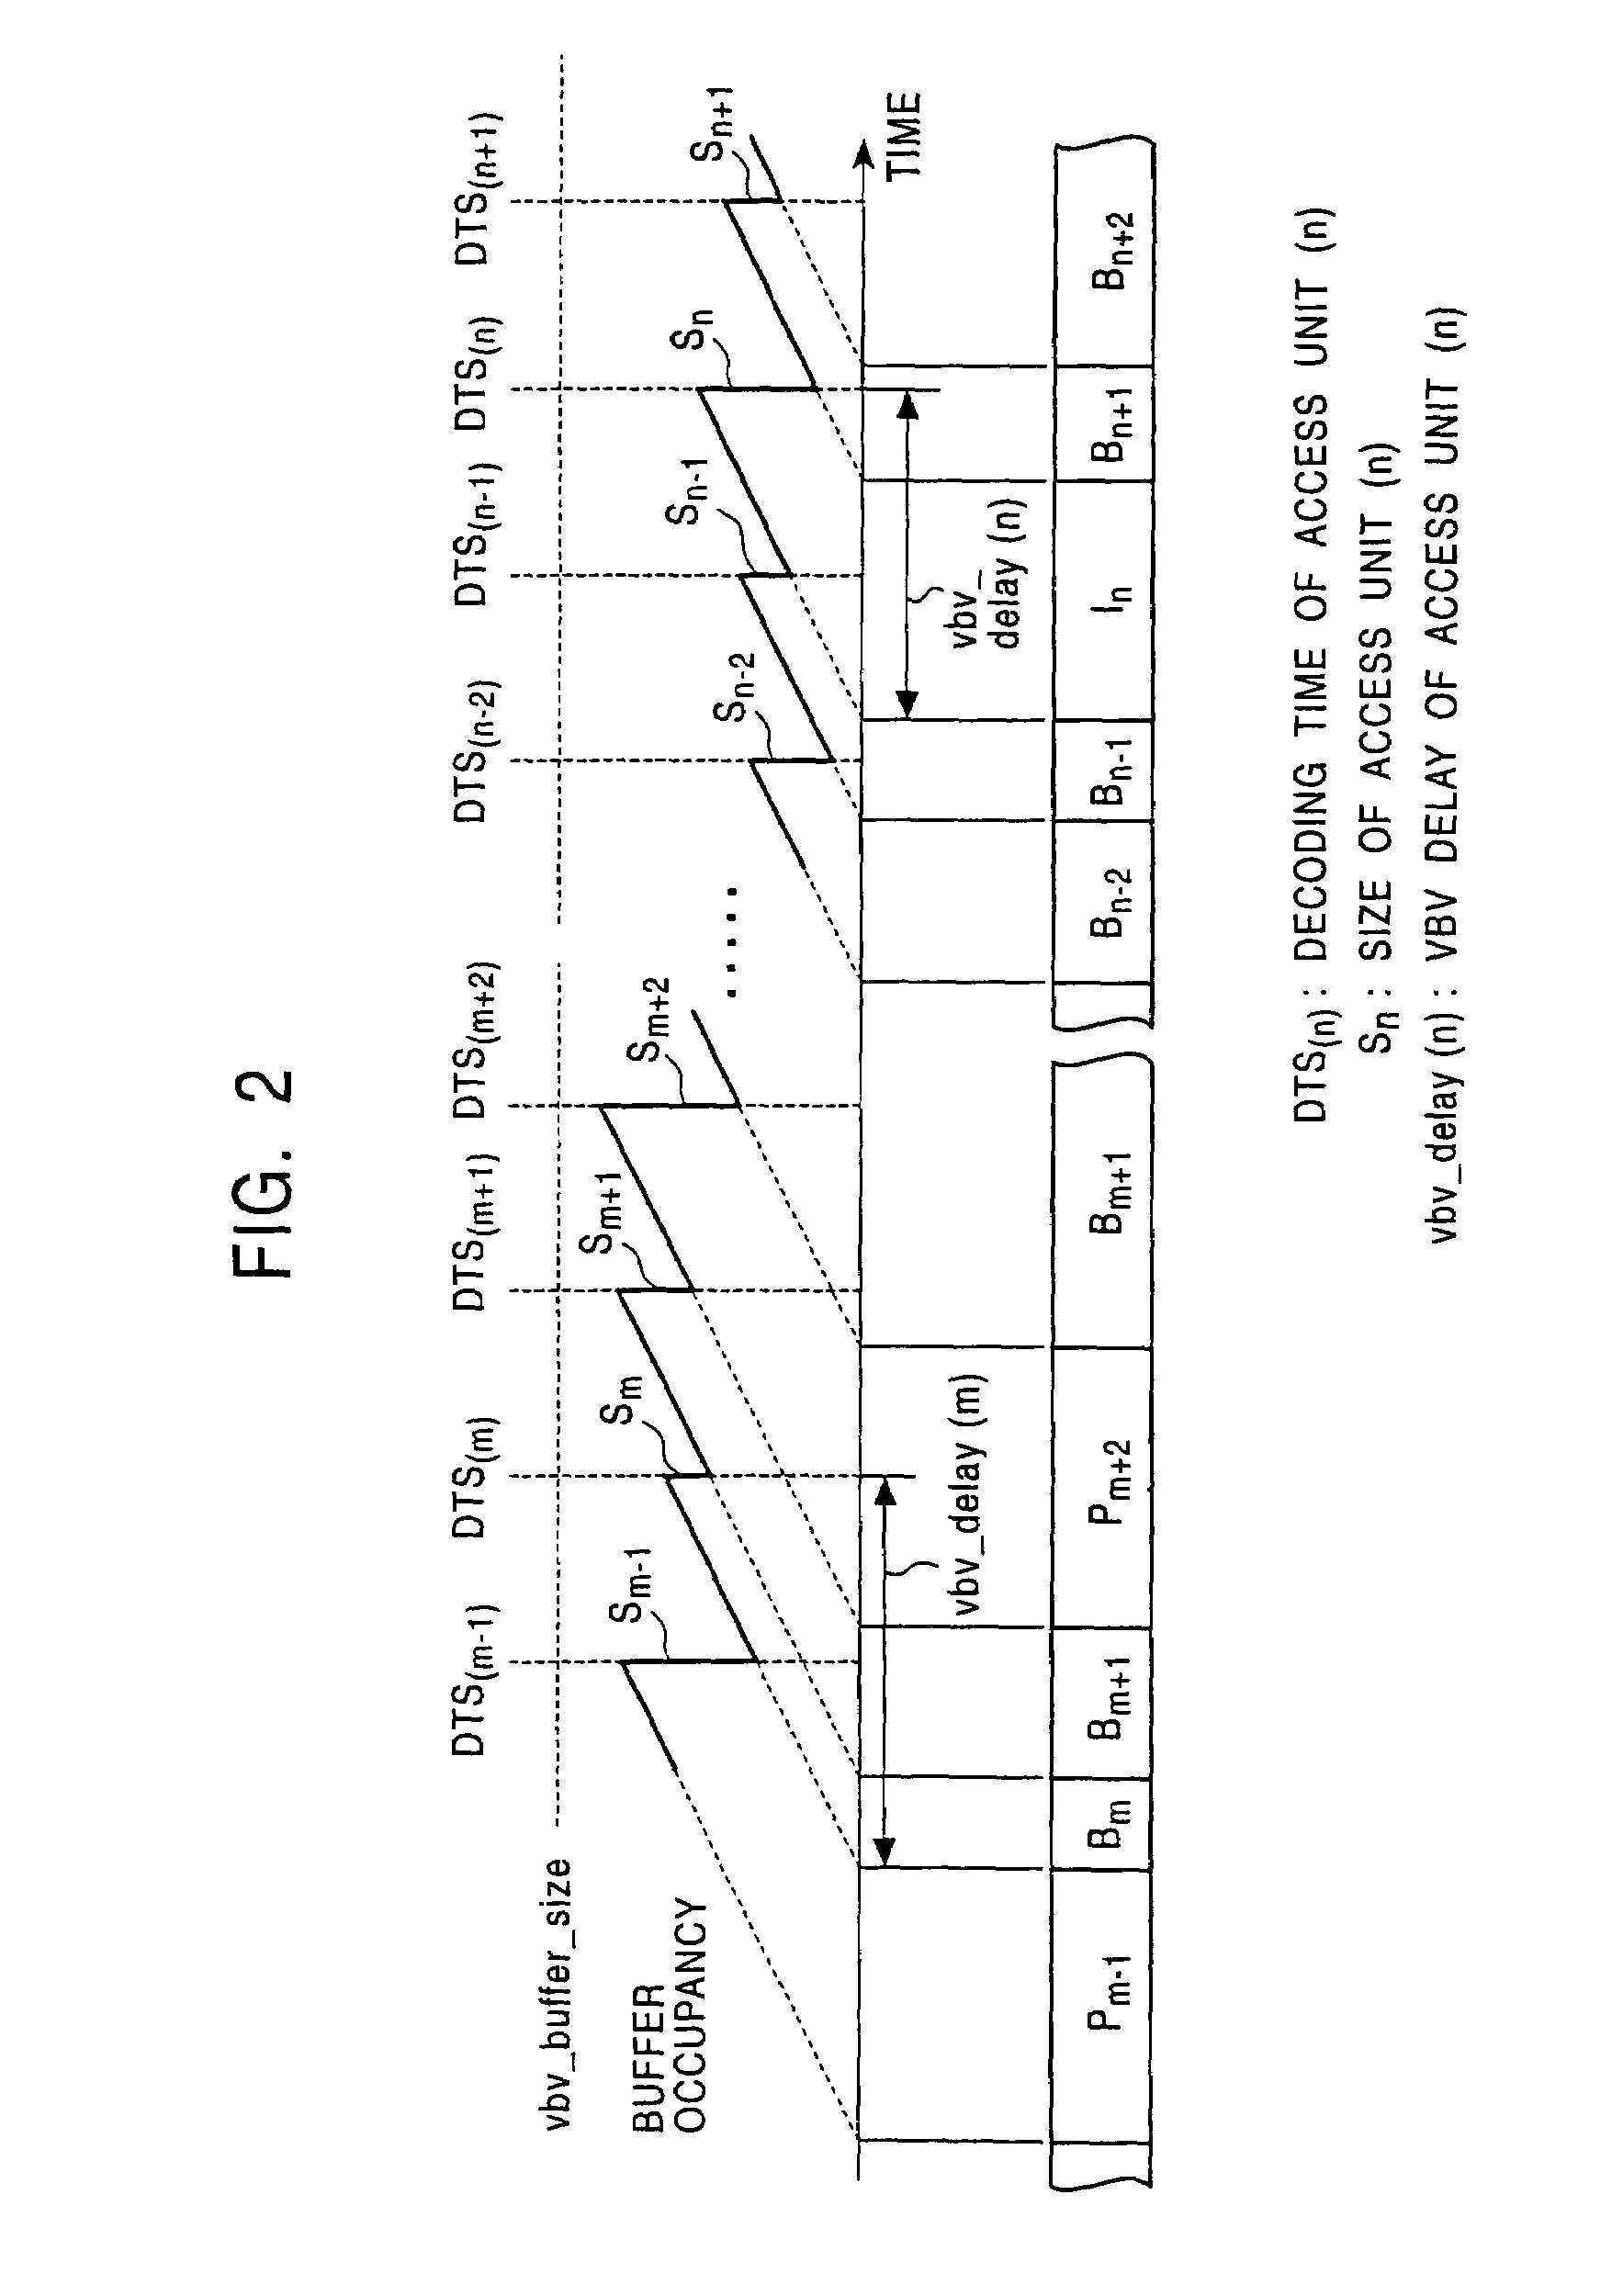 Method and apparatus for conversion and distribution of data utilizing trick-play requests and meta-data information